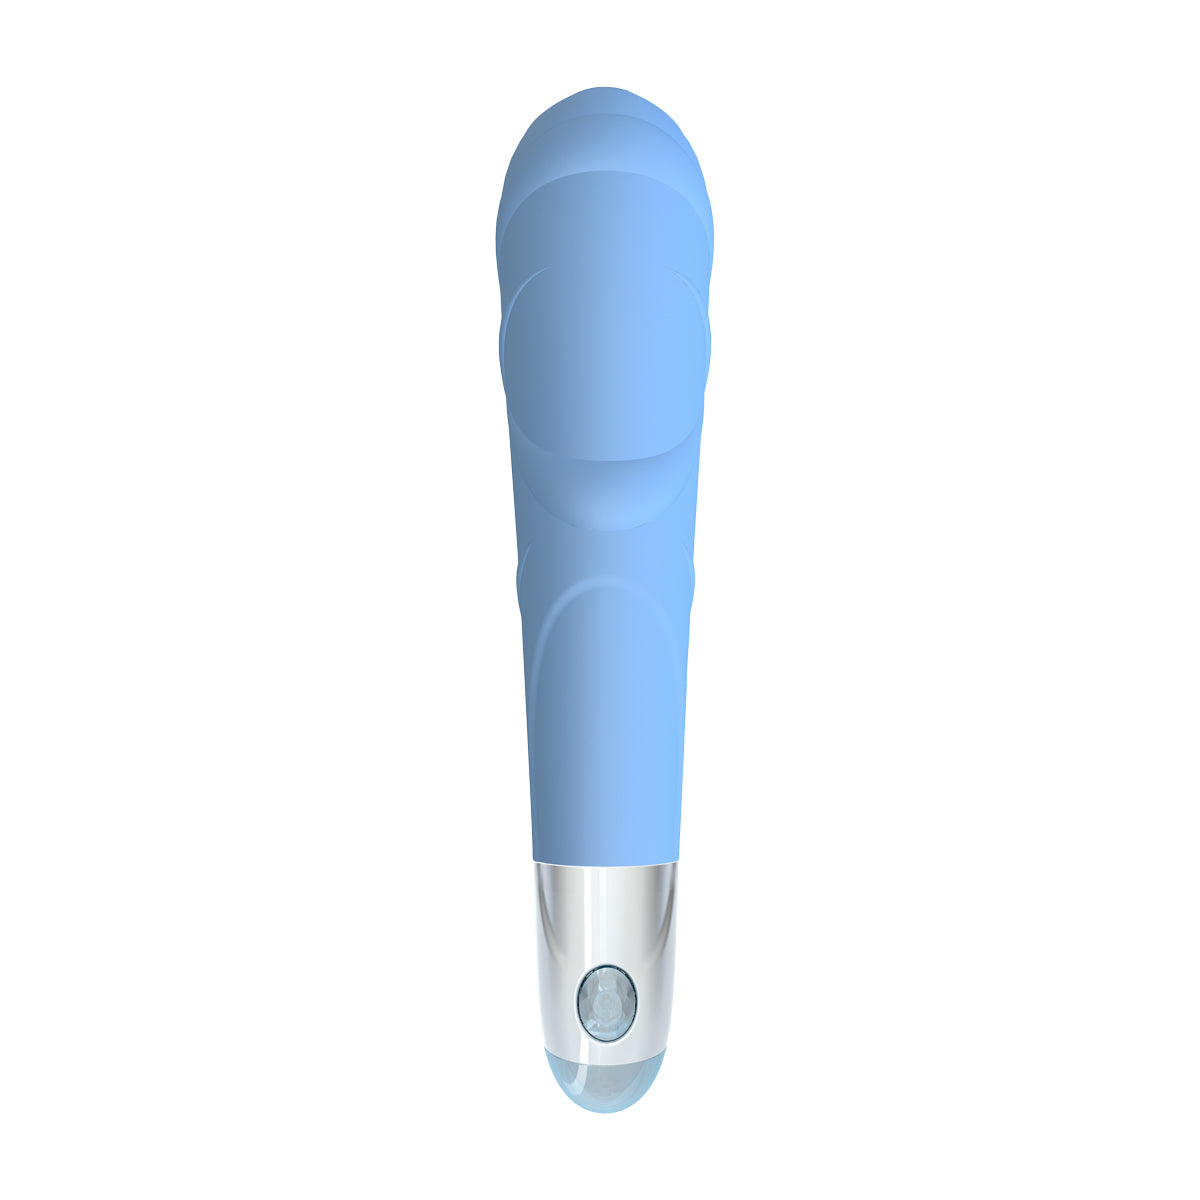 Mae B Lovely Vibes - Laced Textured Soft Touch Vibrator - Blue